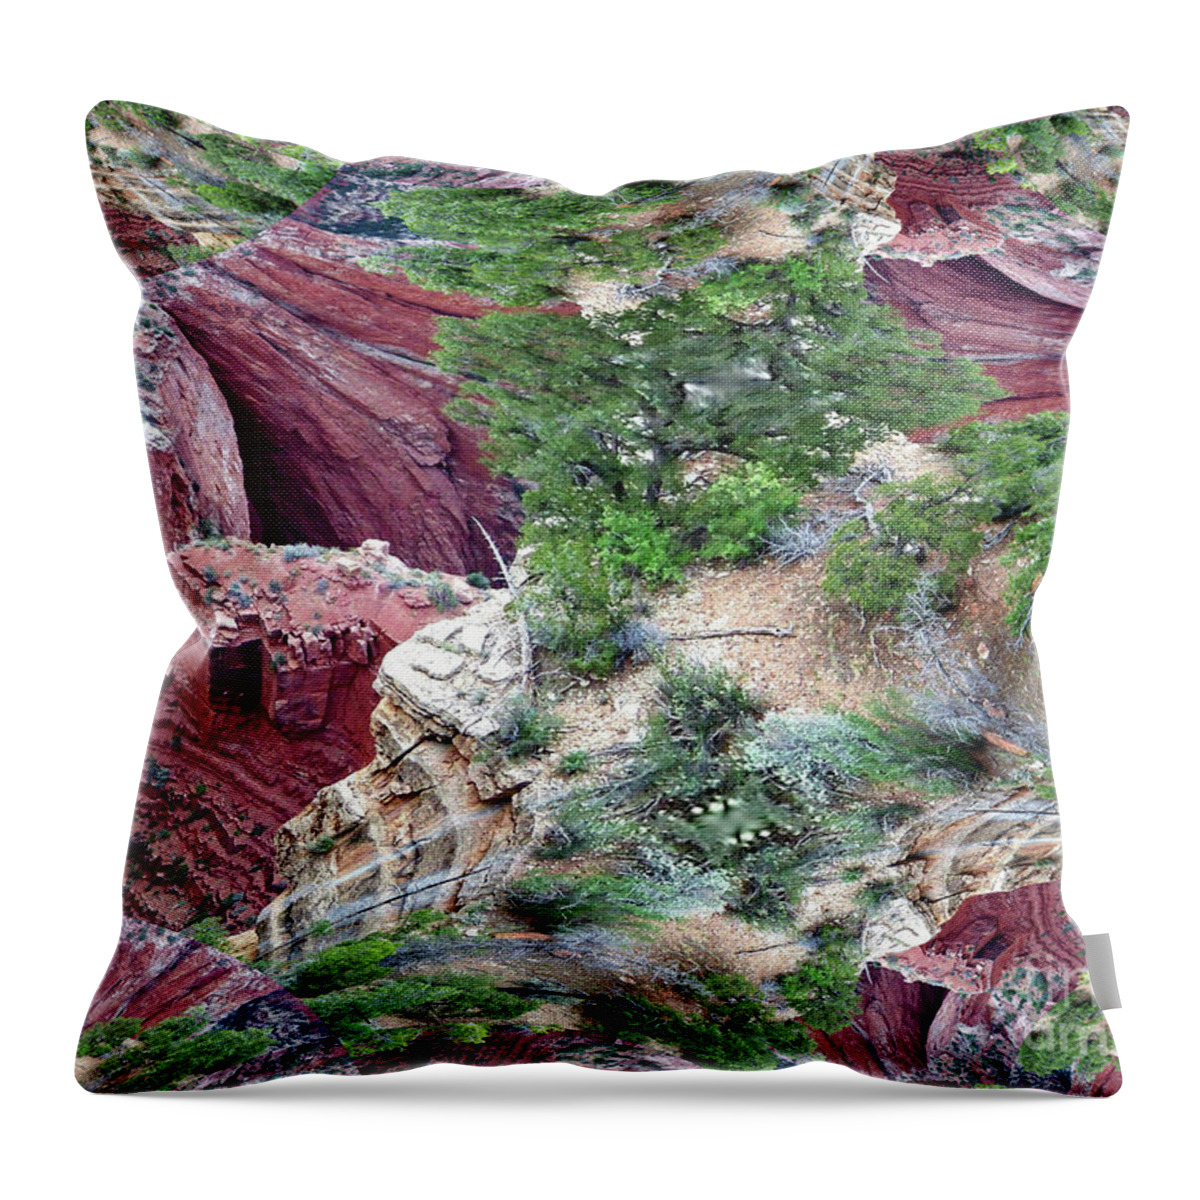 Grand Canyon Throw Pillow featuring the digital art Grand Canyon Fractal by Charles Robinson